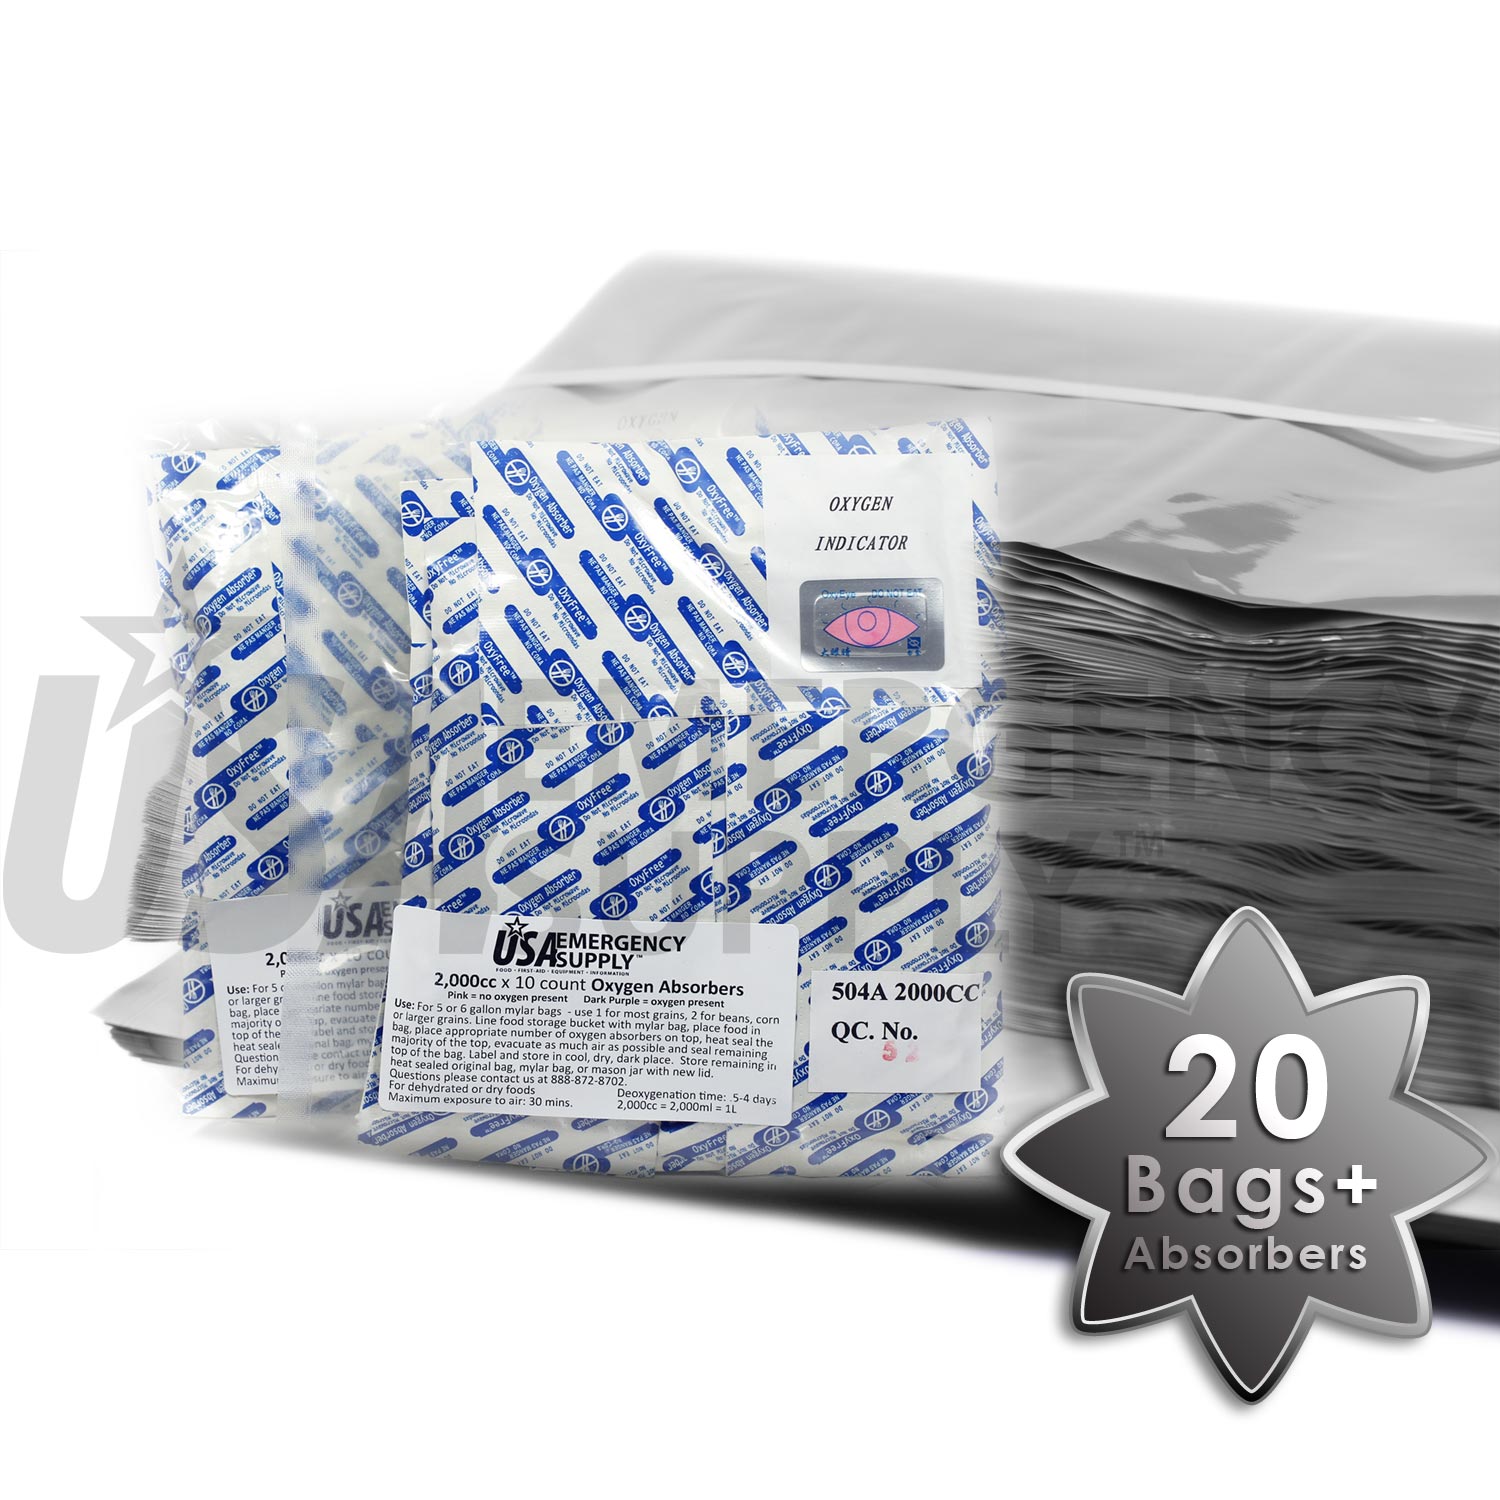 https://www.usaemergencysupply.com/media/img/products/lg/20-count-5-gallon-mylar-bags-and-oxygen-absorbers-a-lg.jpg